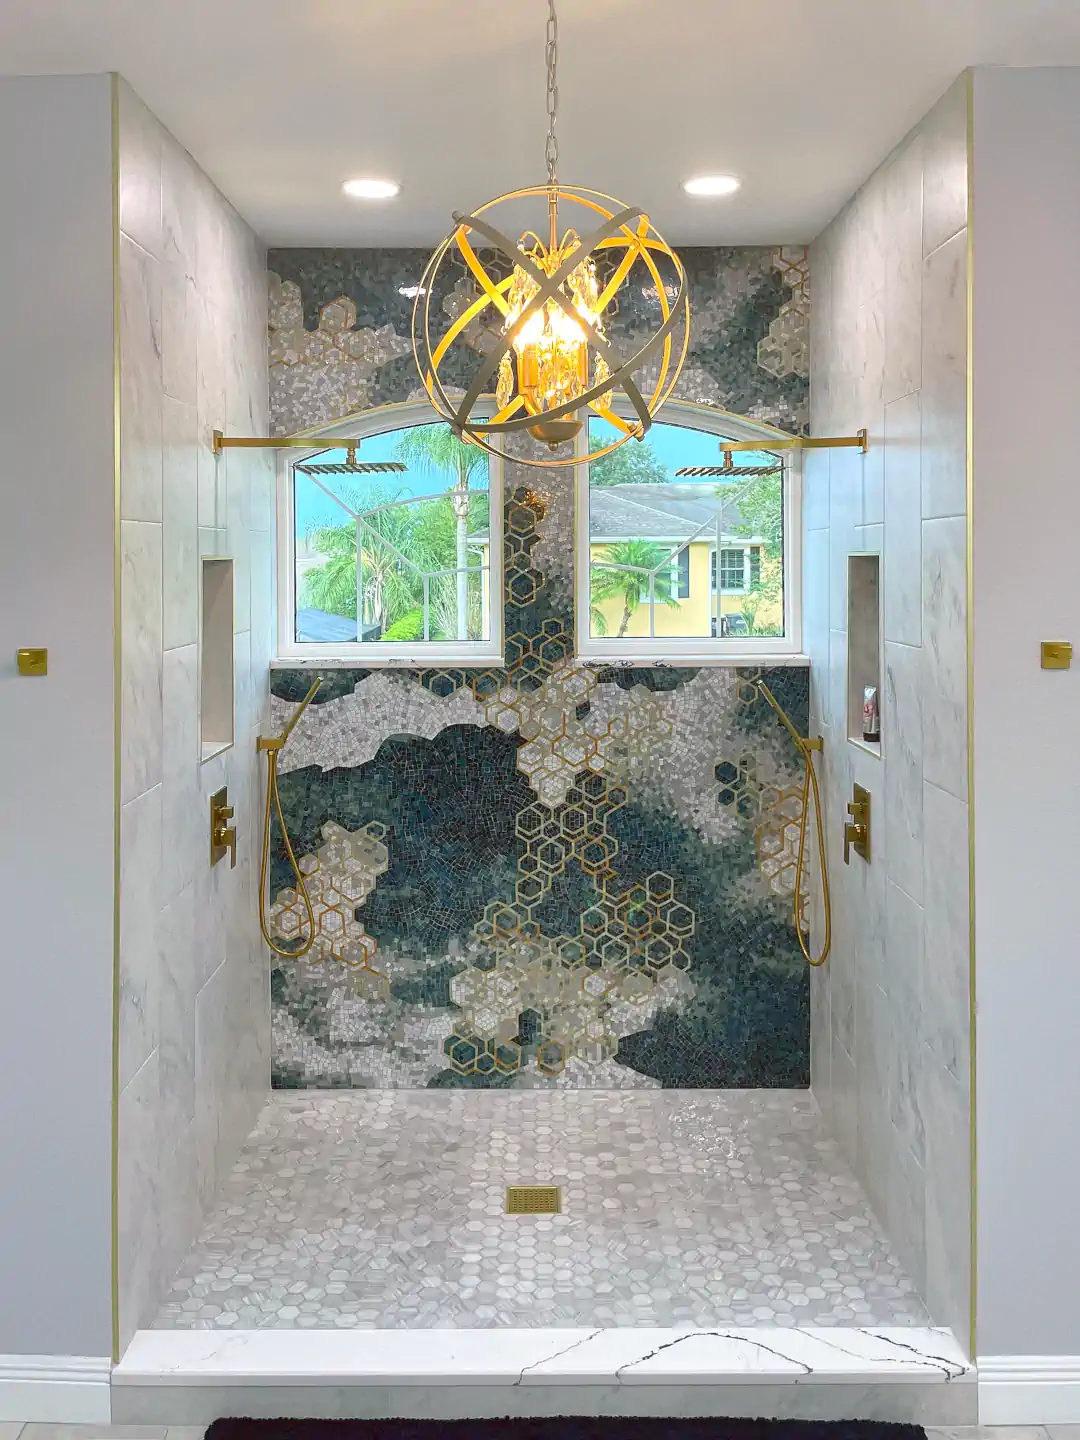 Abstract Mosaic Art as accent wall in a STUNNING shower 1